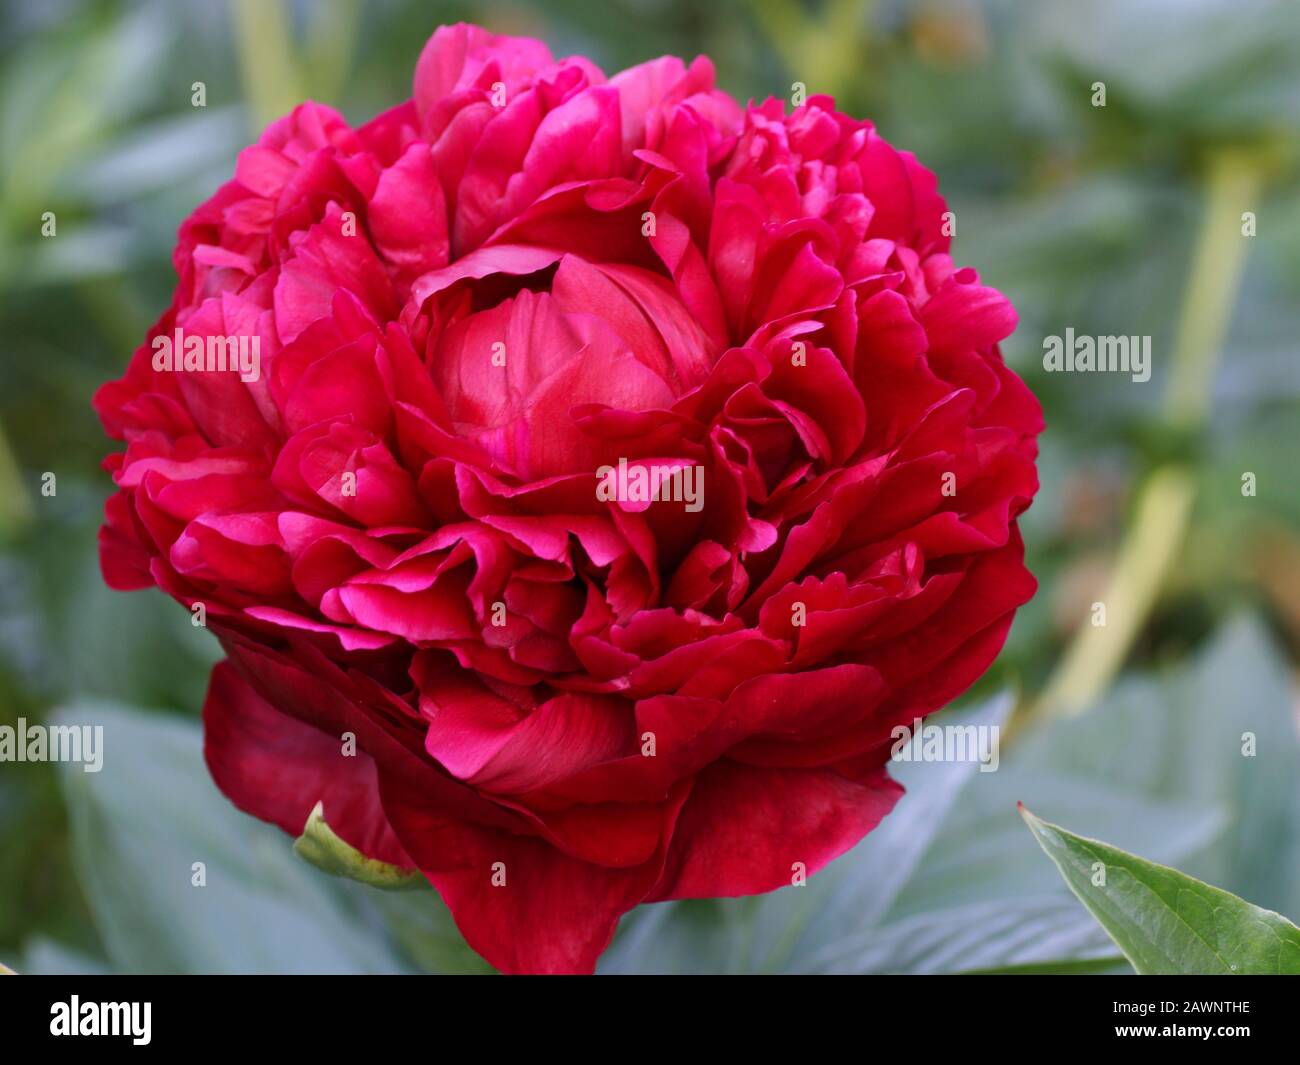 Paeonia Henry Bockstoce. Double red peony flower. Paeonia lactiflora (Chinese peony or common garden peony). One flower close-up outdoors. Stock Photo